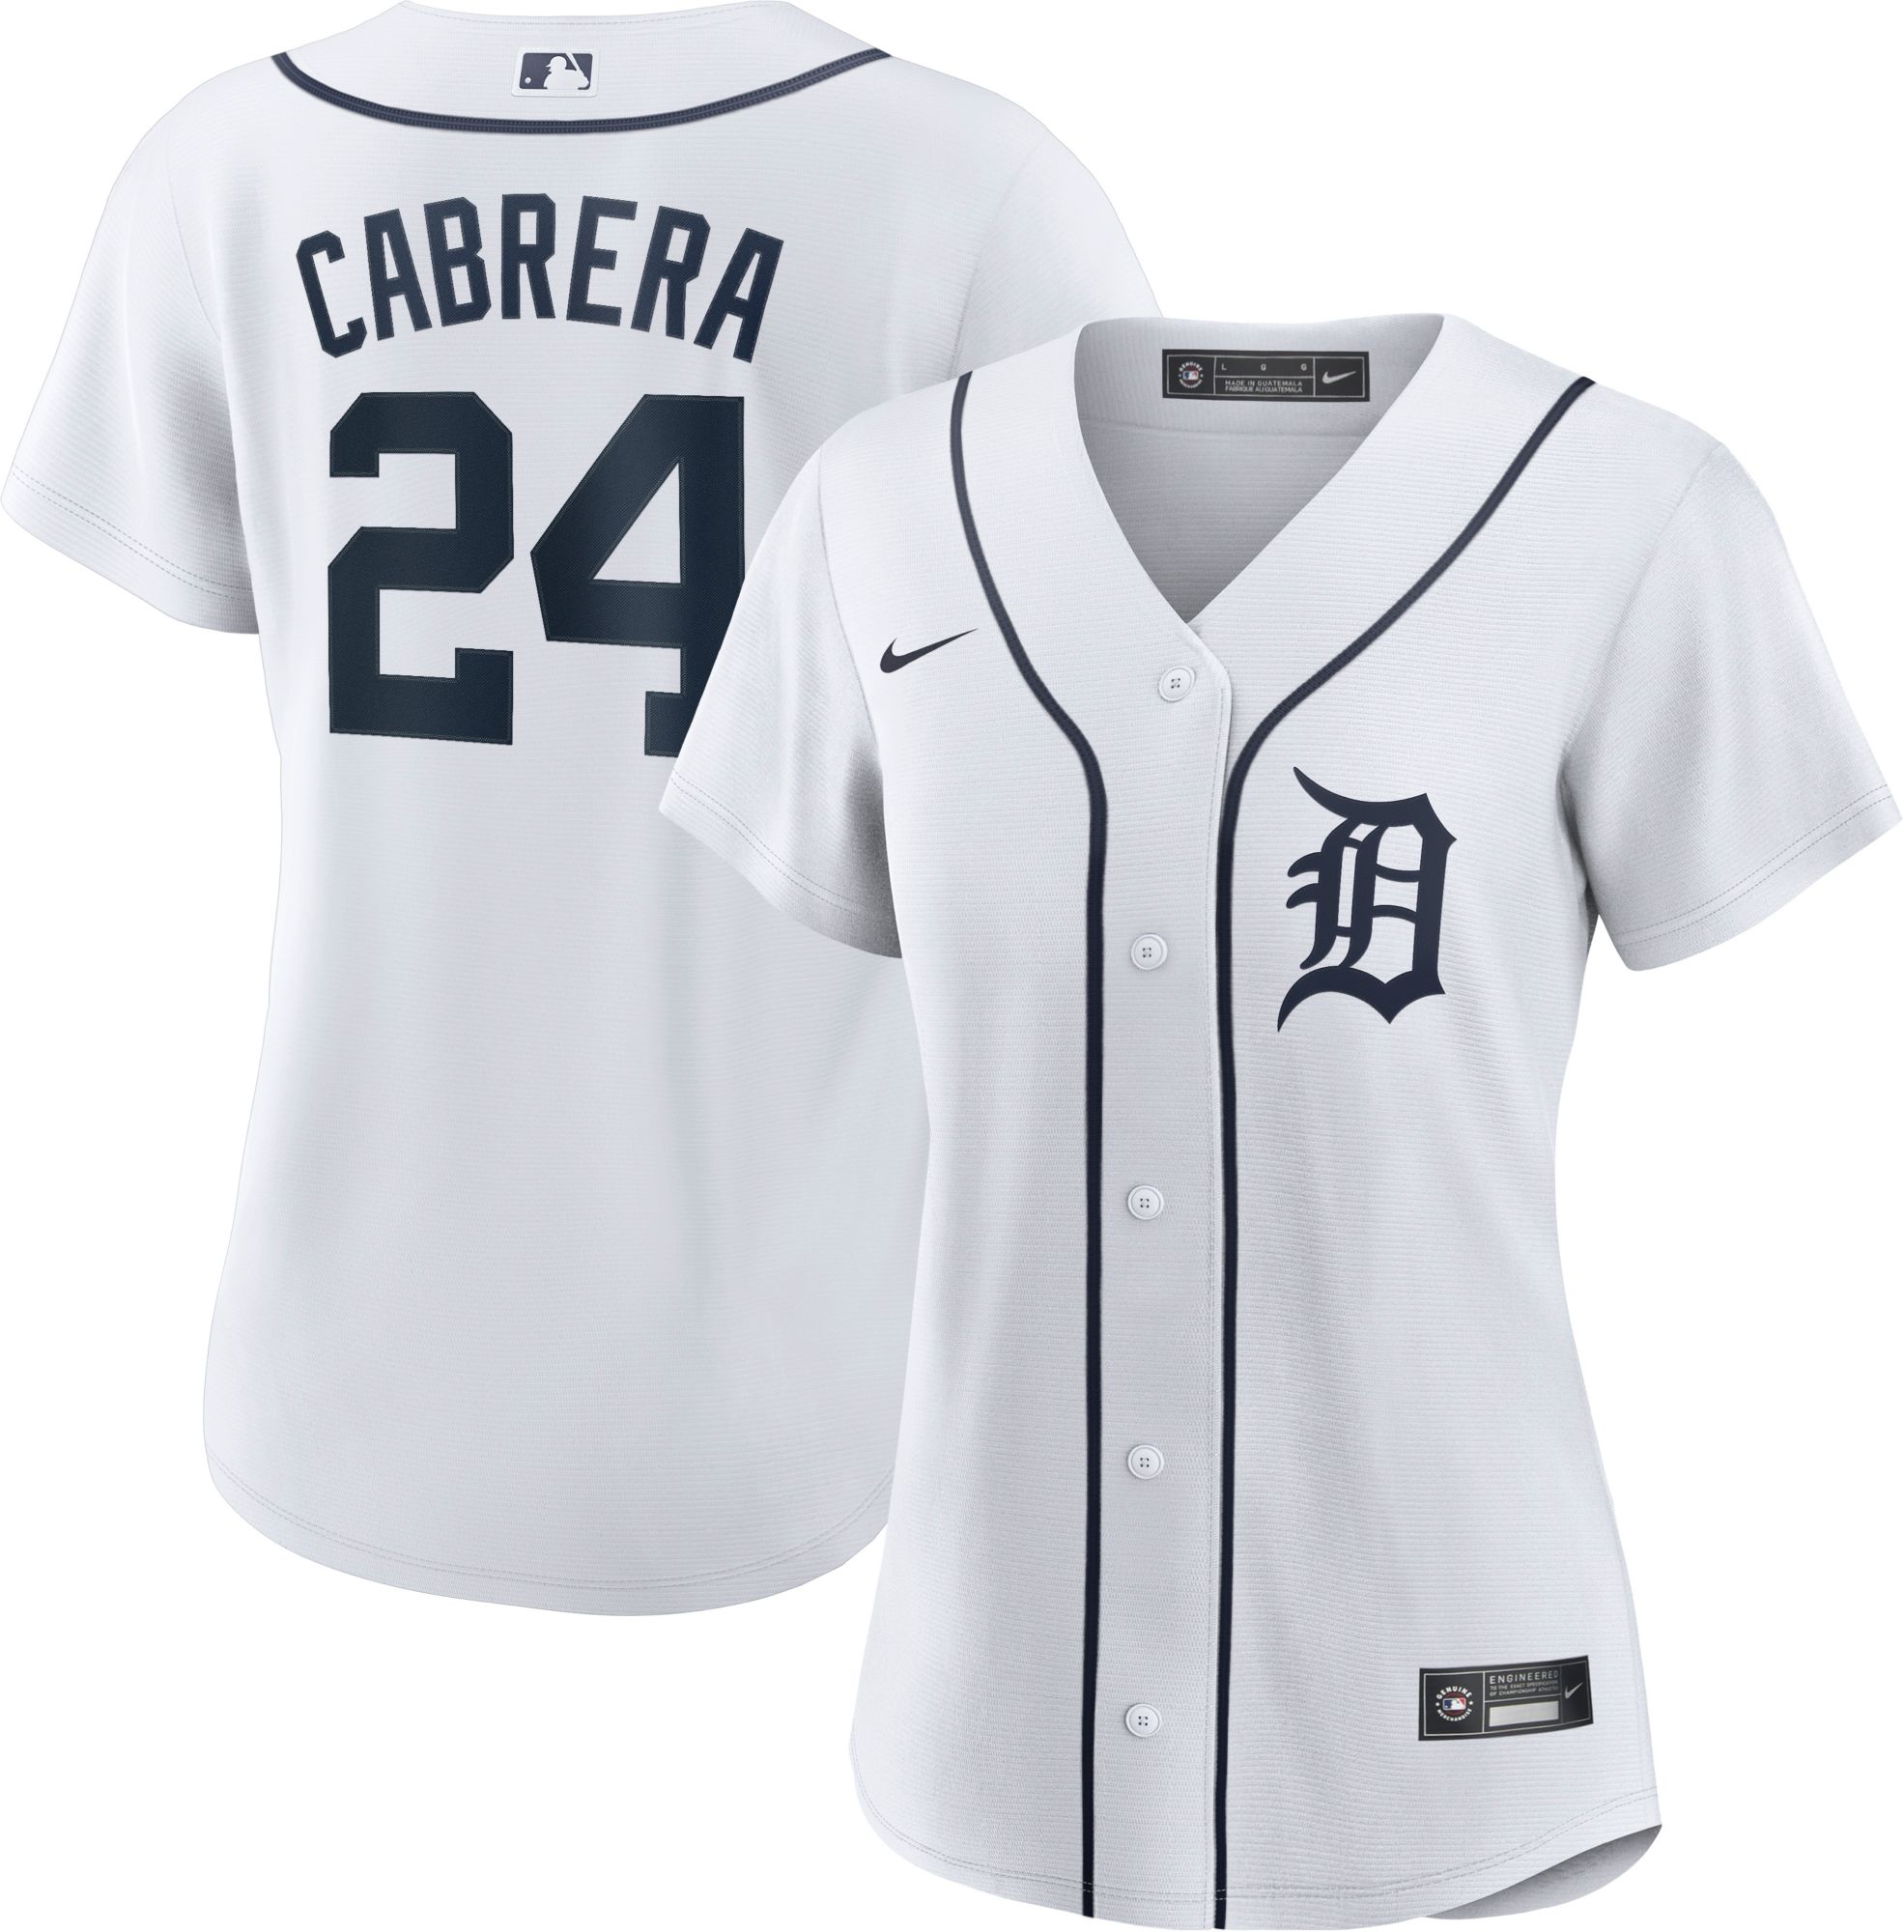 NEW Detroit Tigers Miguel Cabrera #24 Player Shirt Youth L Large (14-16)  Orange